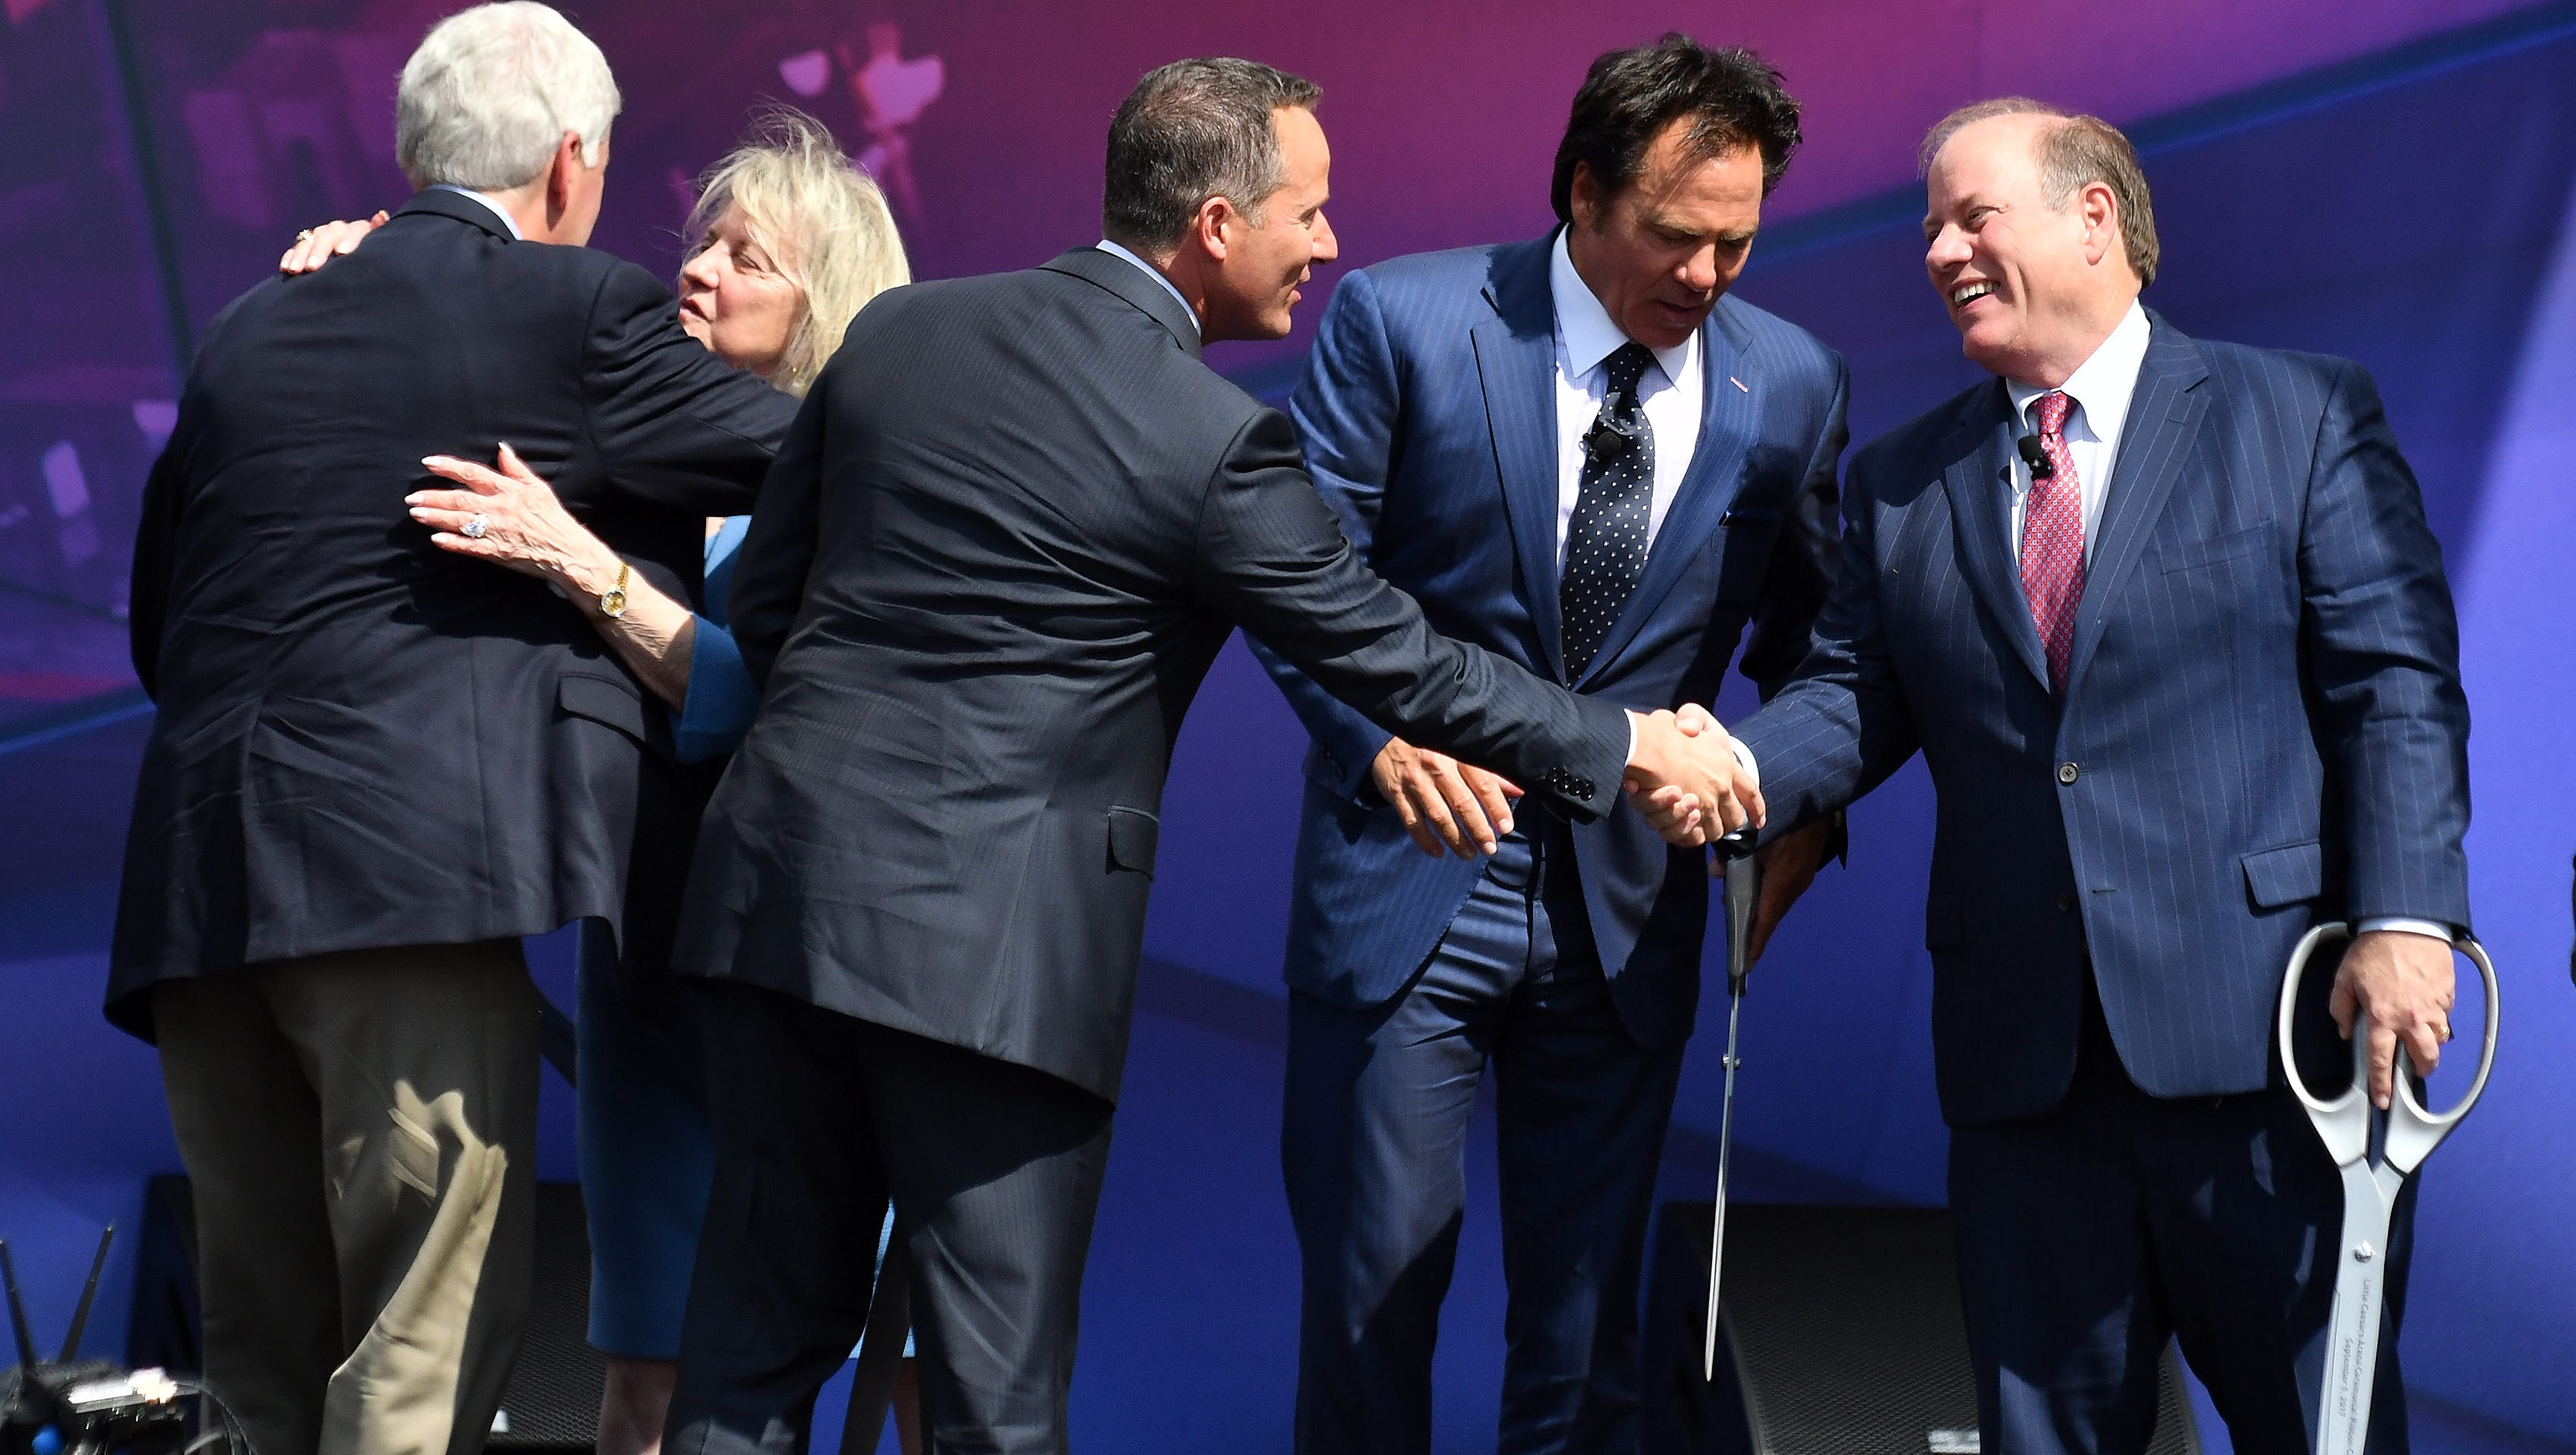 Chris Ilitch, center, shakes hands with Detroit mayor Mike Duggan, right, with Tom Gores, Pistons owner, between them, at the ribbon cutting ceremony.